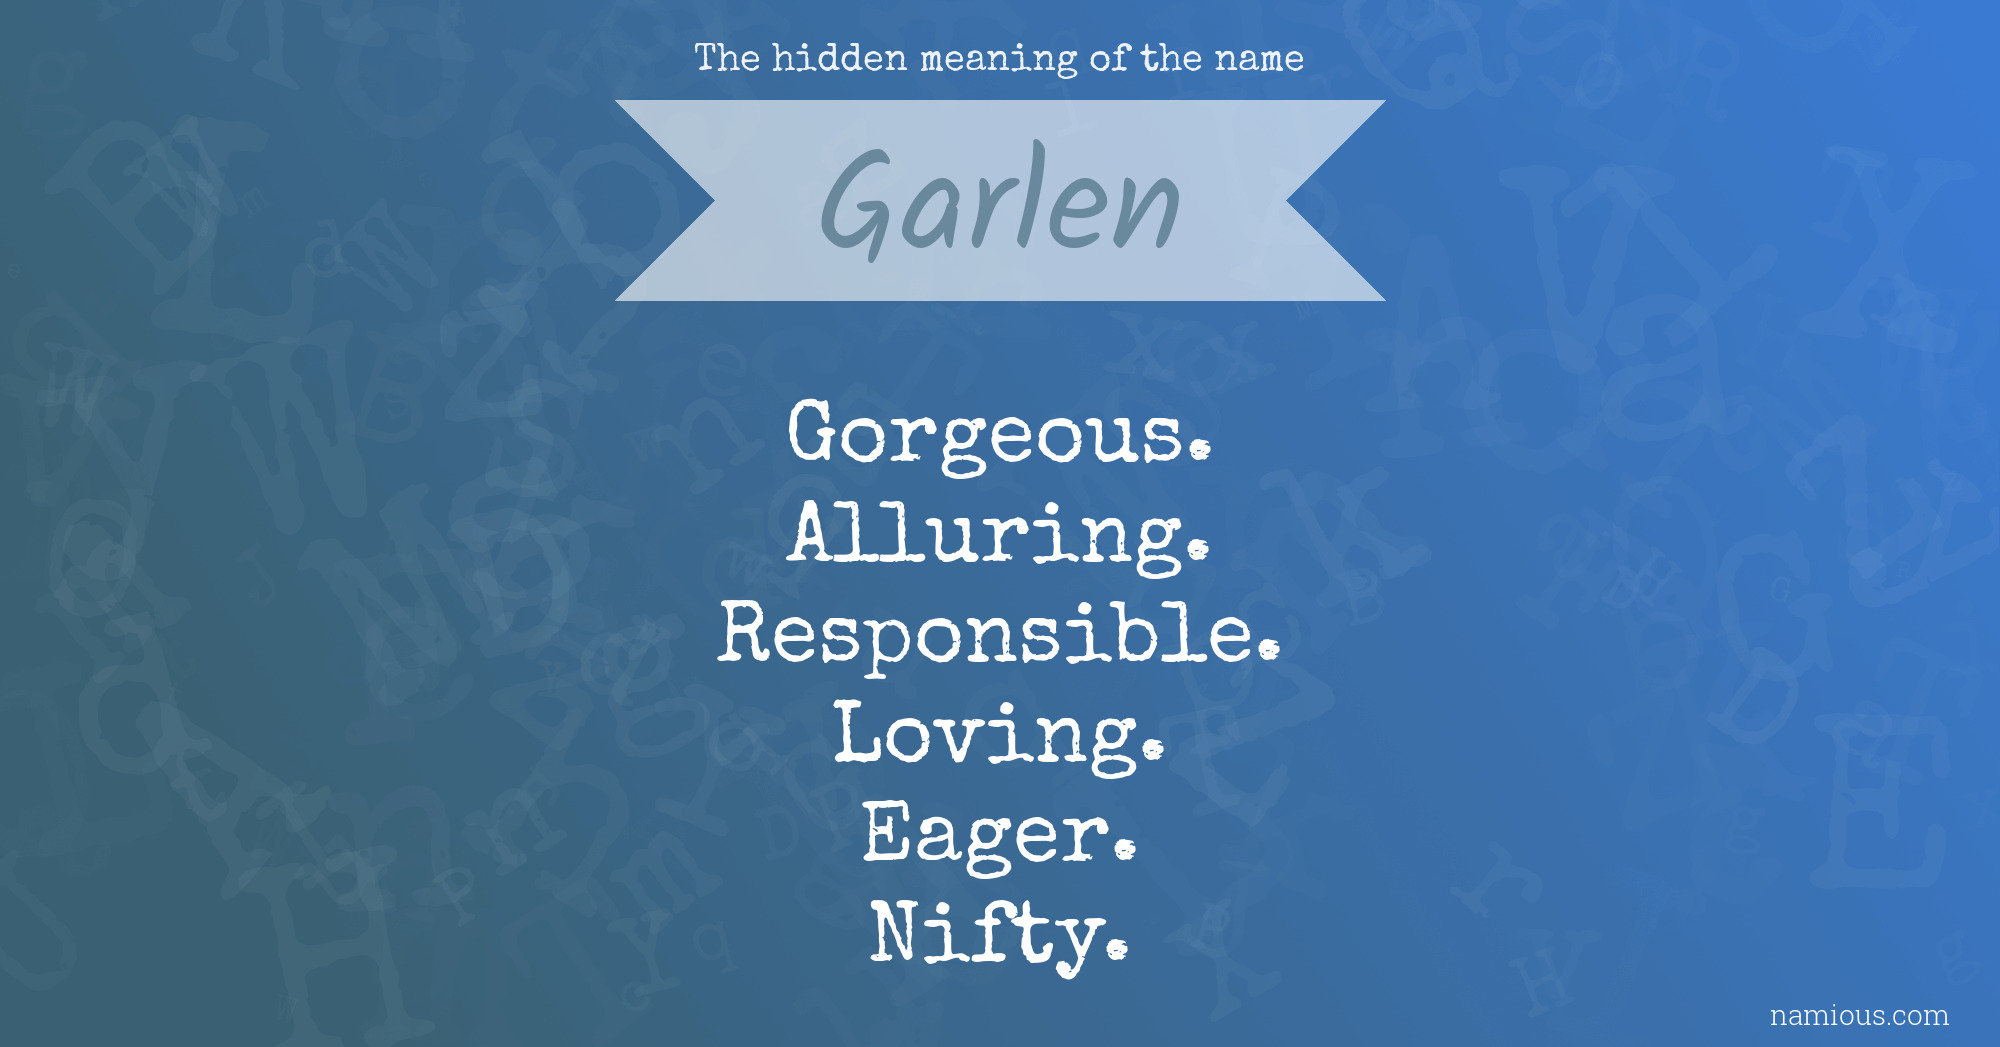 The hidden meaning of the name Garlen